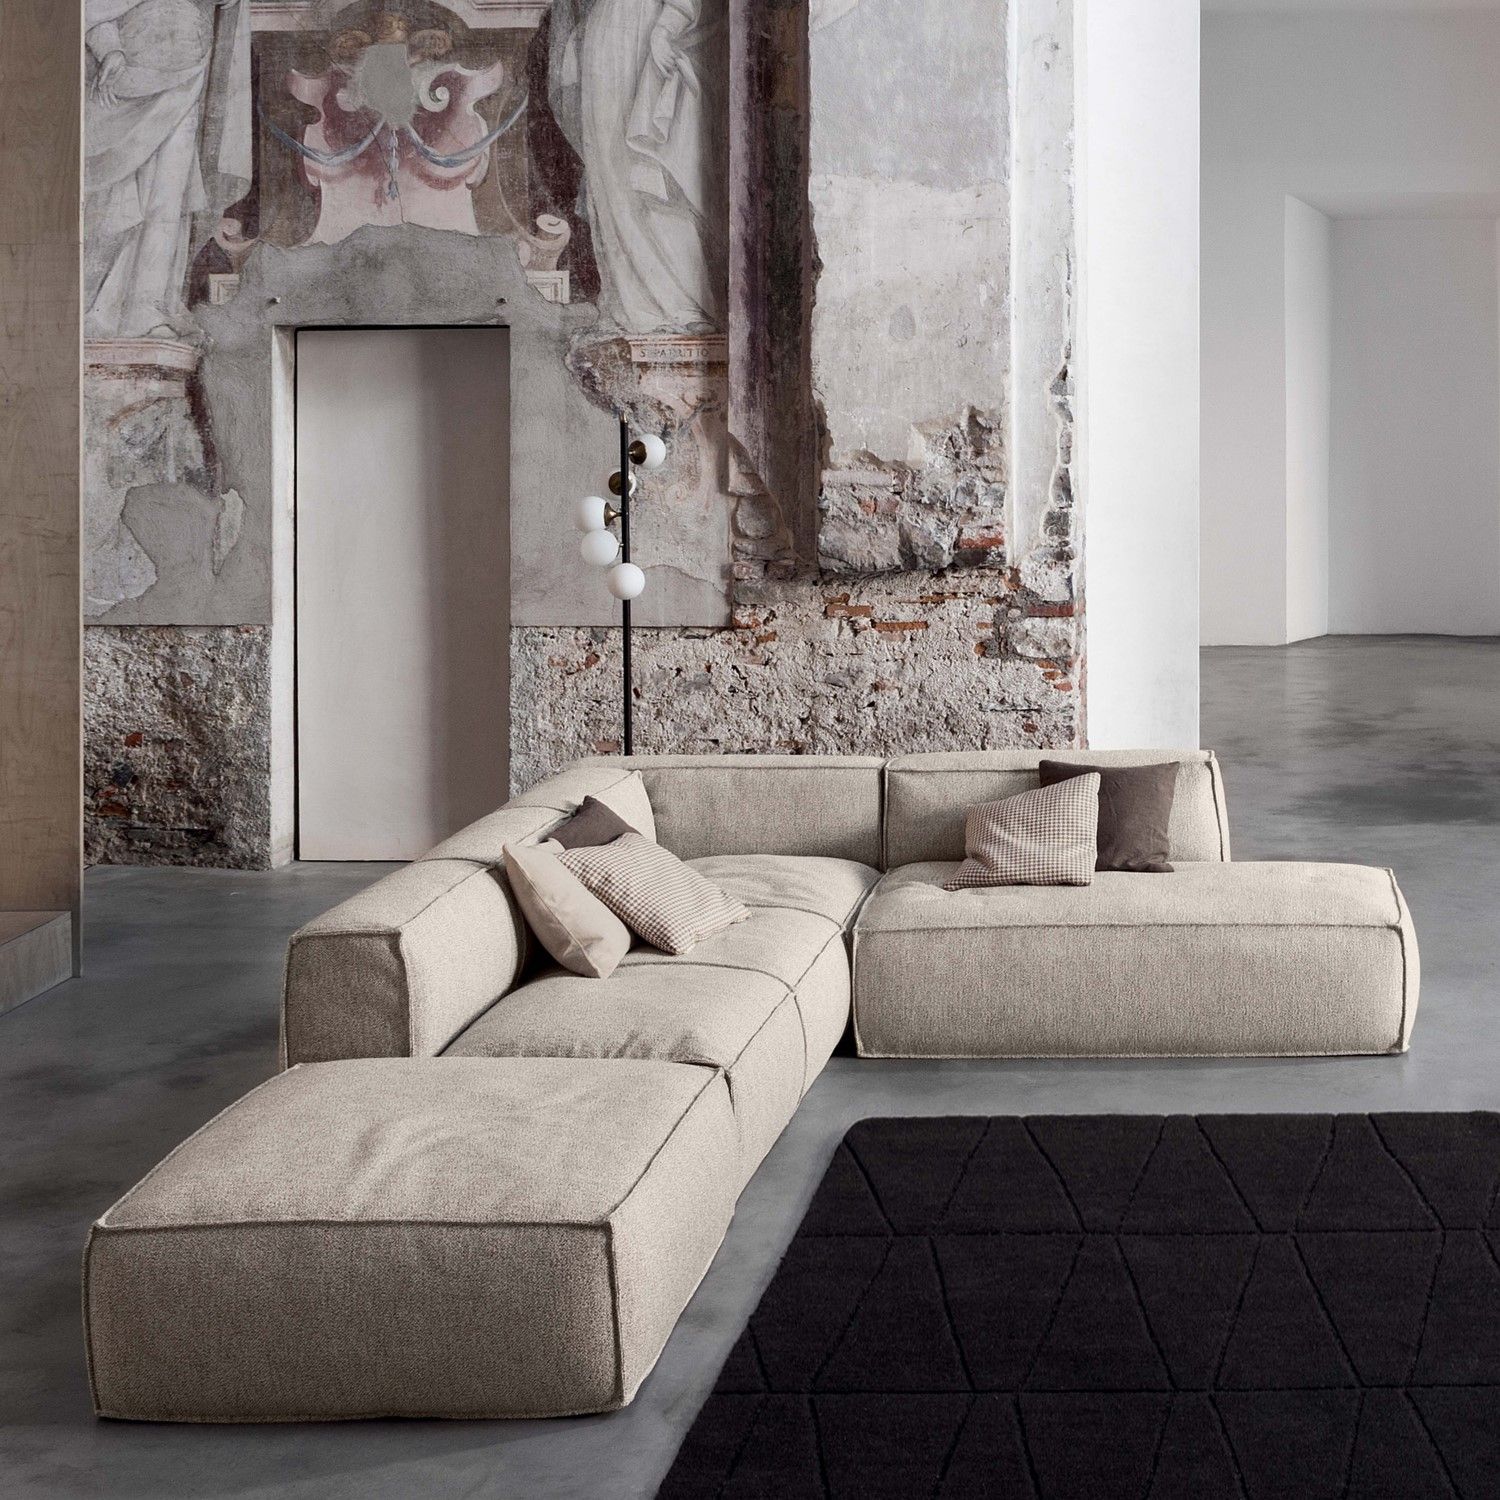 There’s style in sofas! some design sofas
  that you’re bound to adore!